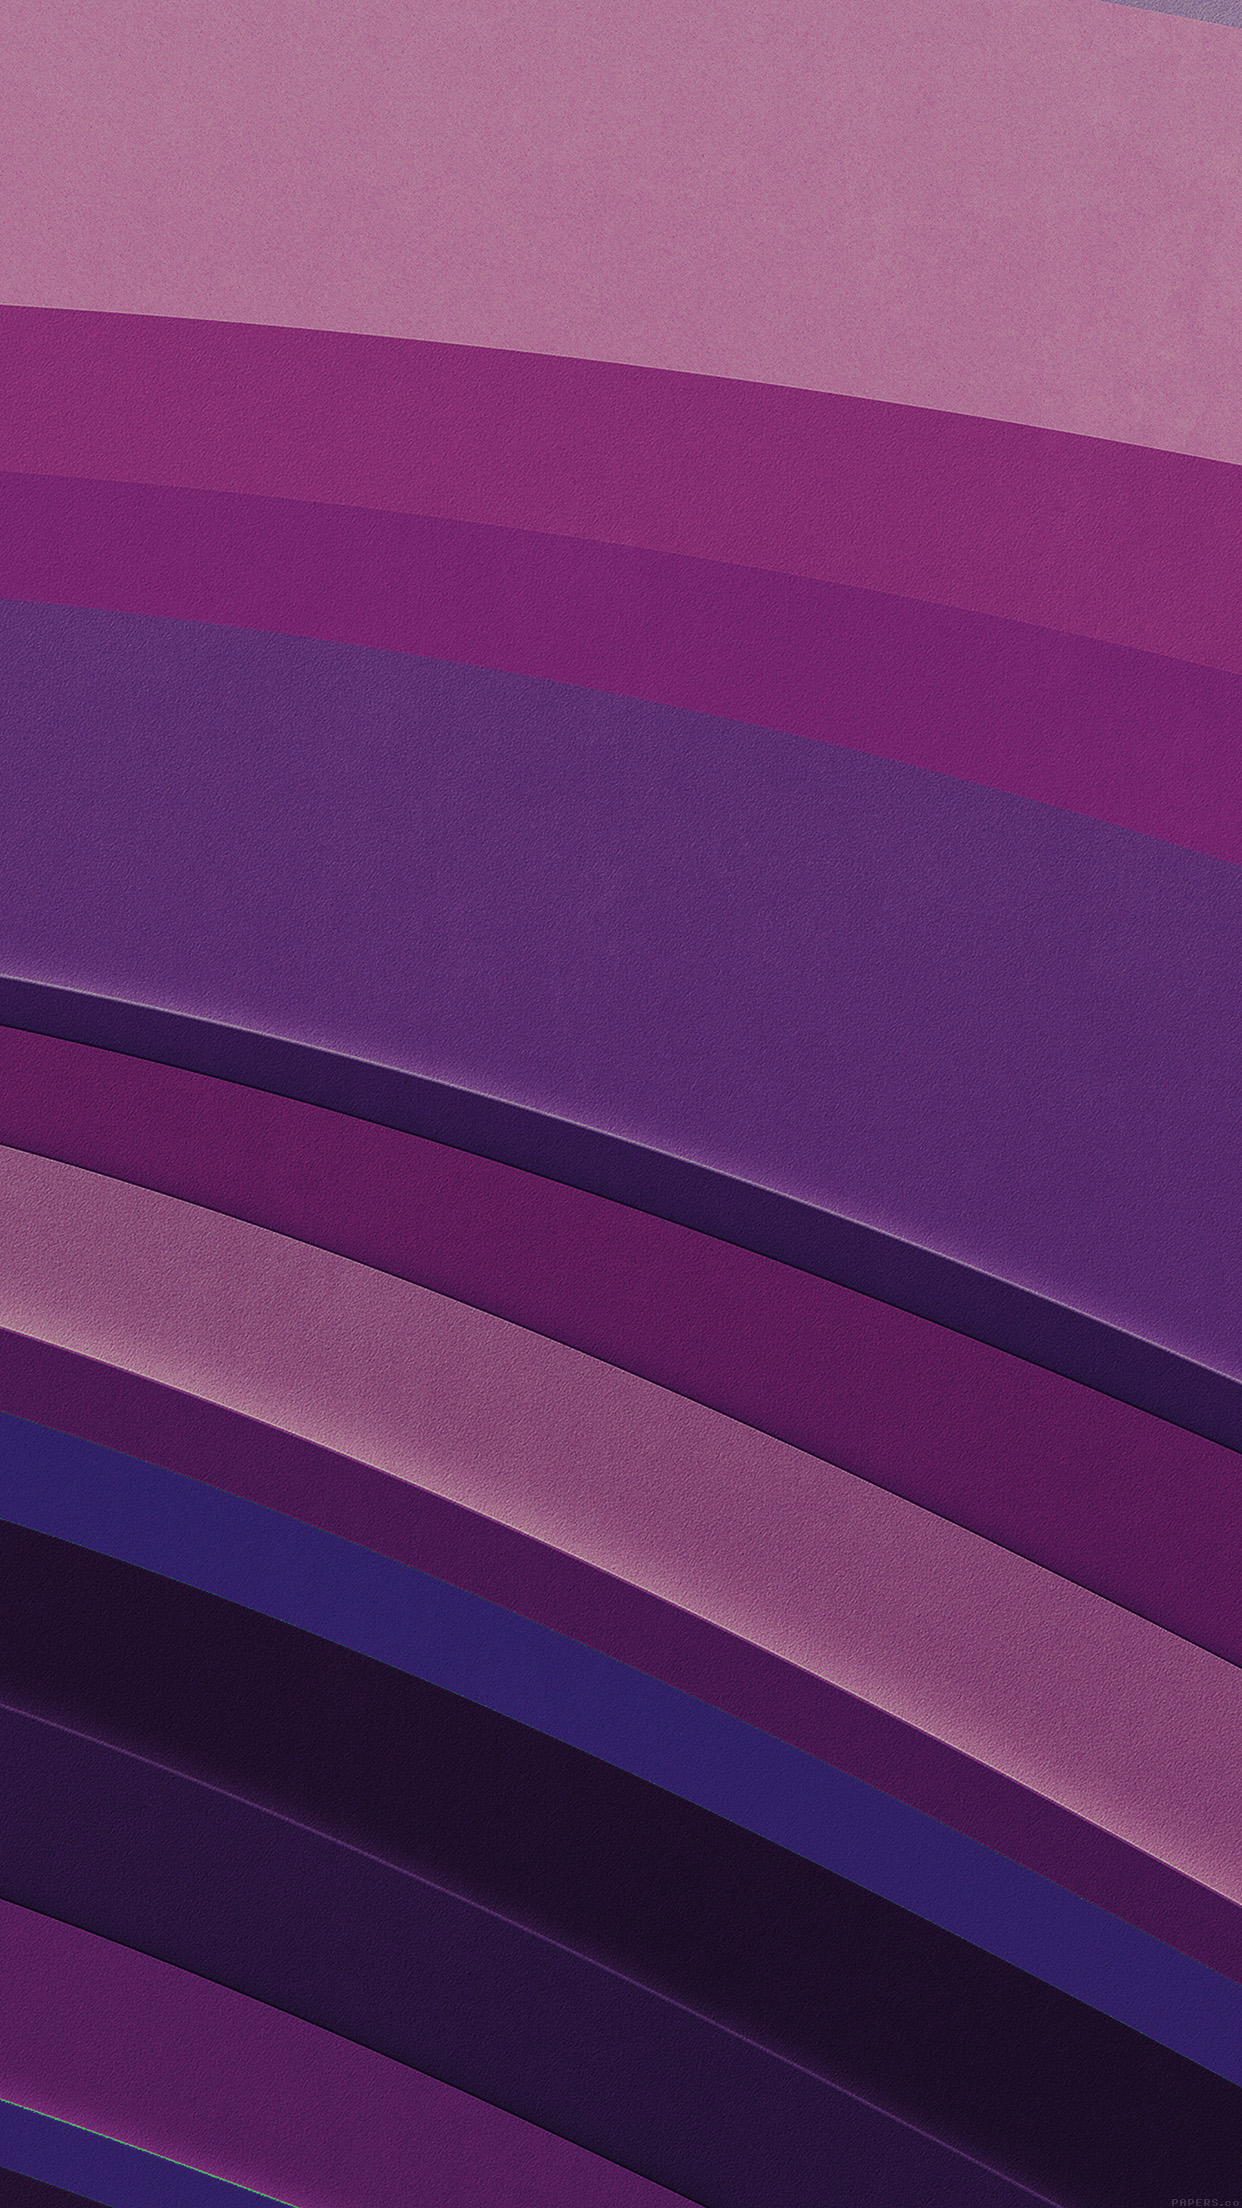 Sea Abstract Purple Graphic Art Pattern Android wallpaper